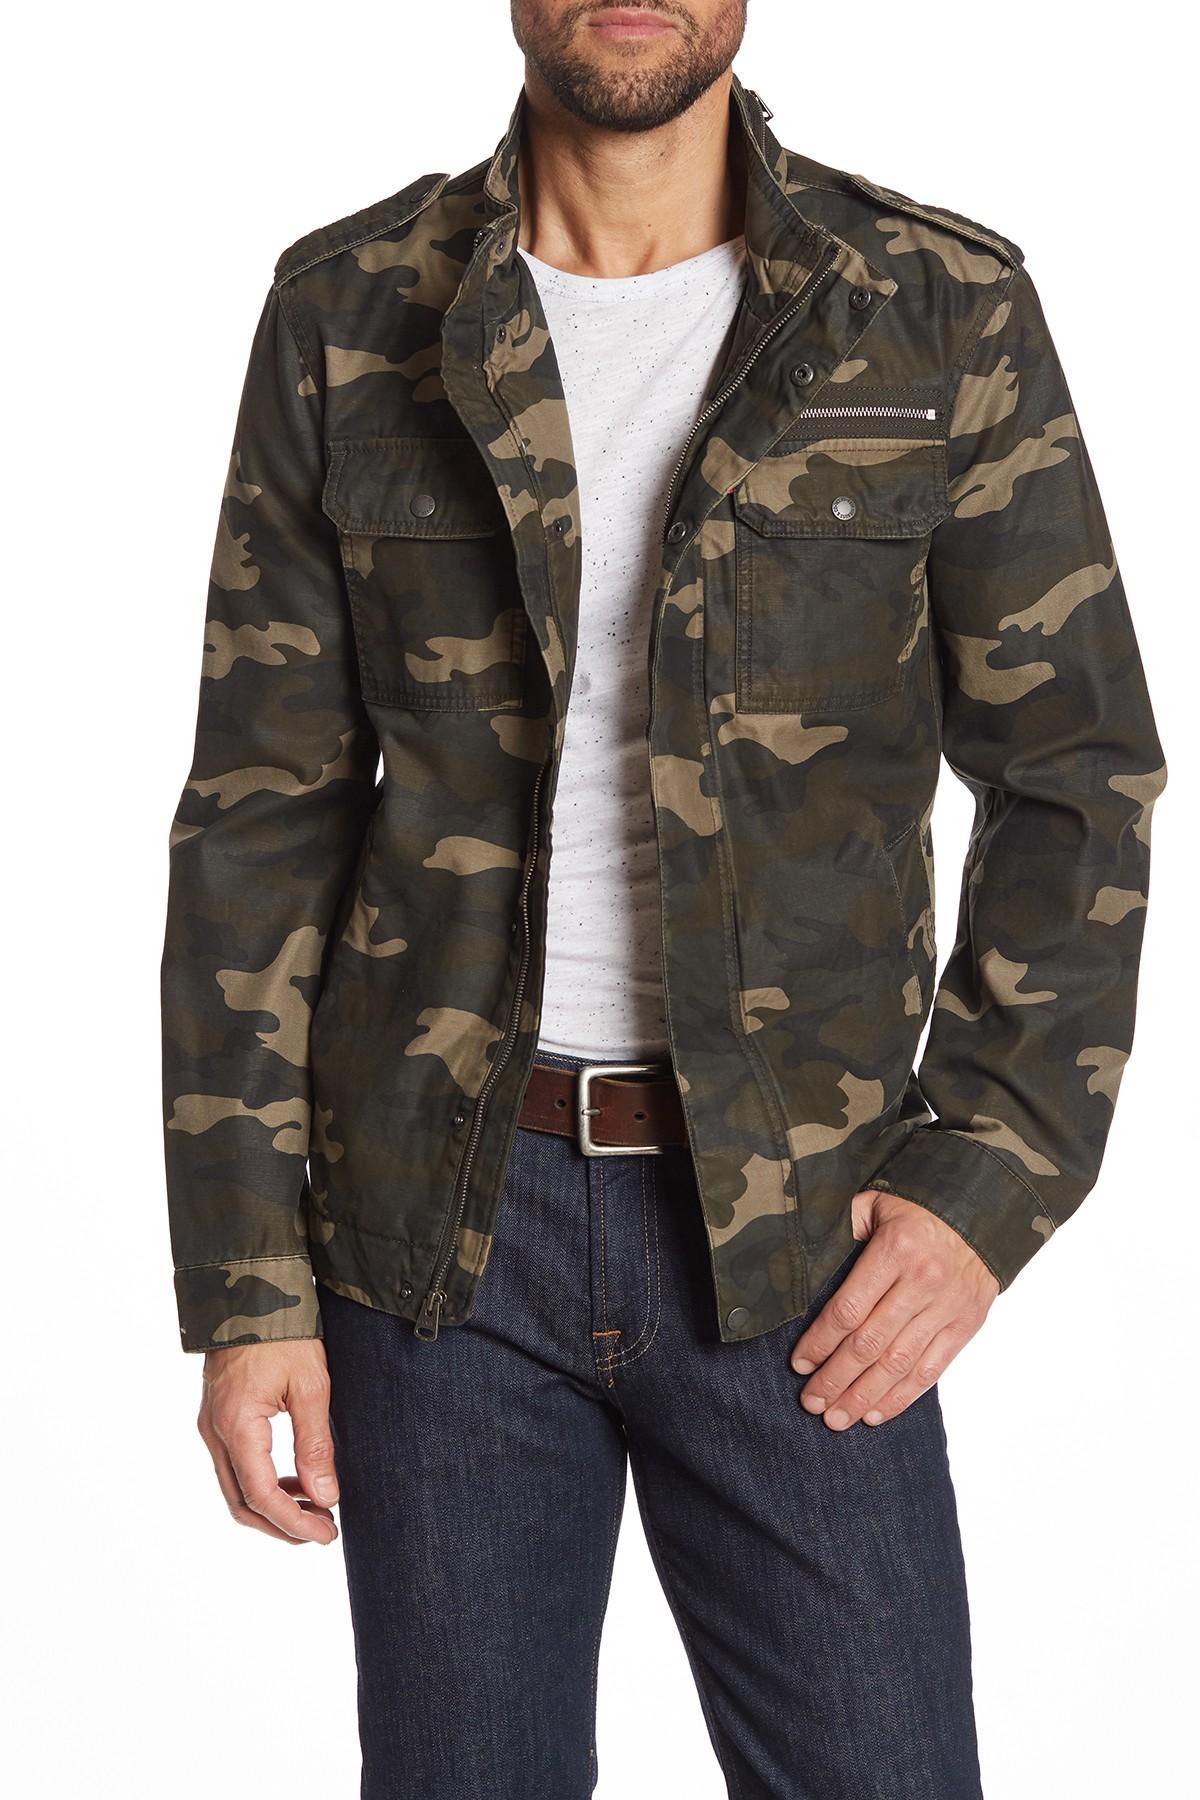 Levis Army Jacket - Army Military